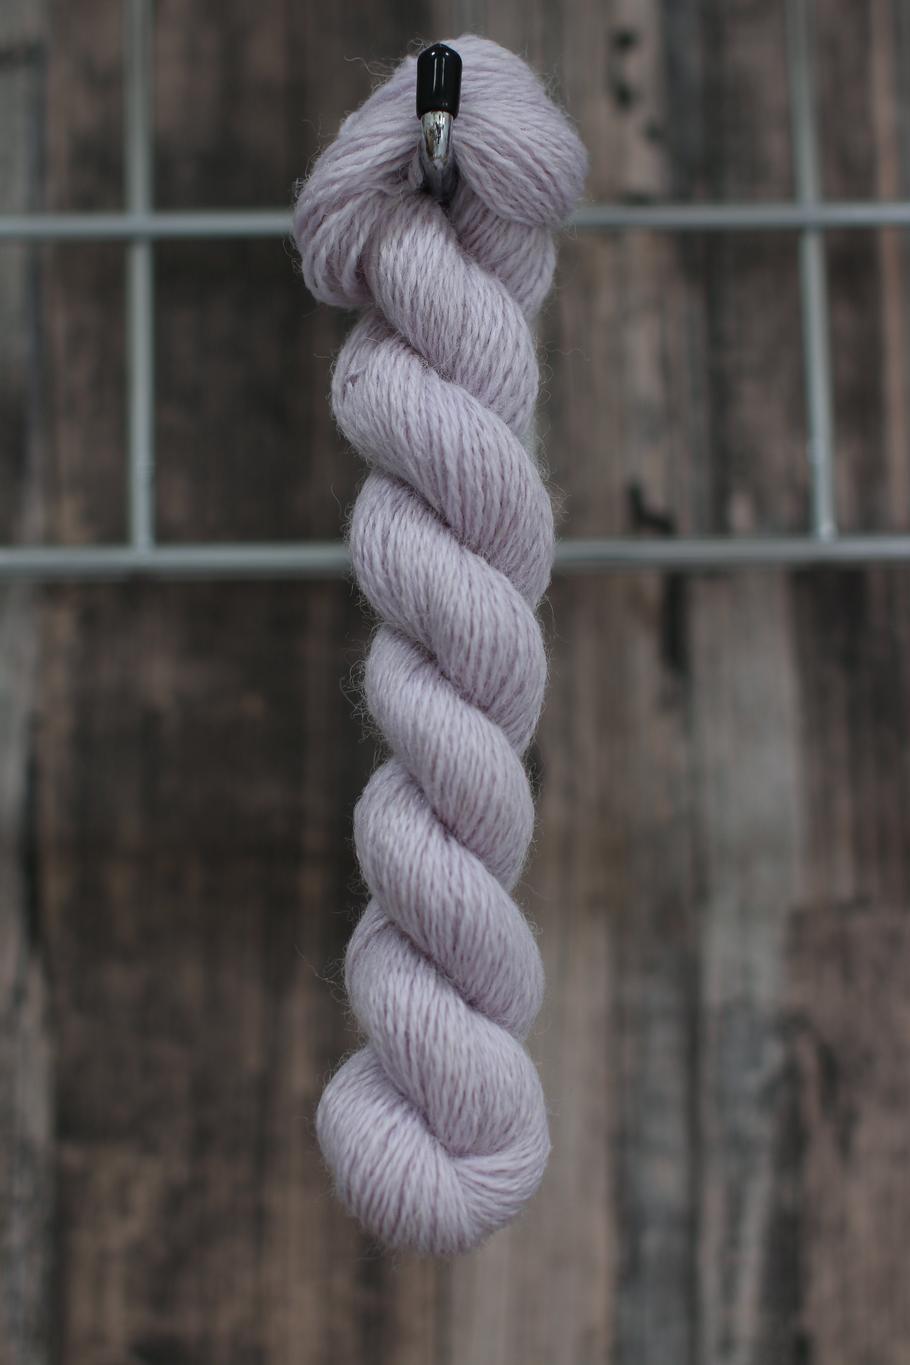 A single skein of pale lavender wool hanging from a hook